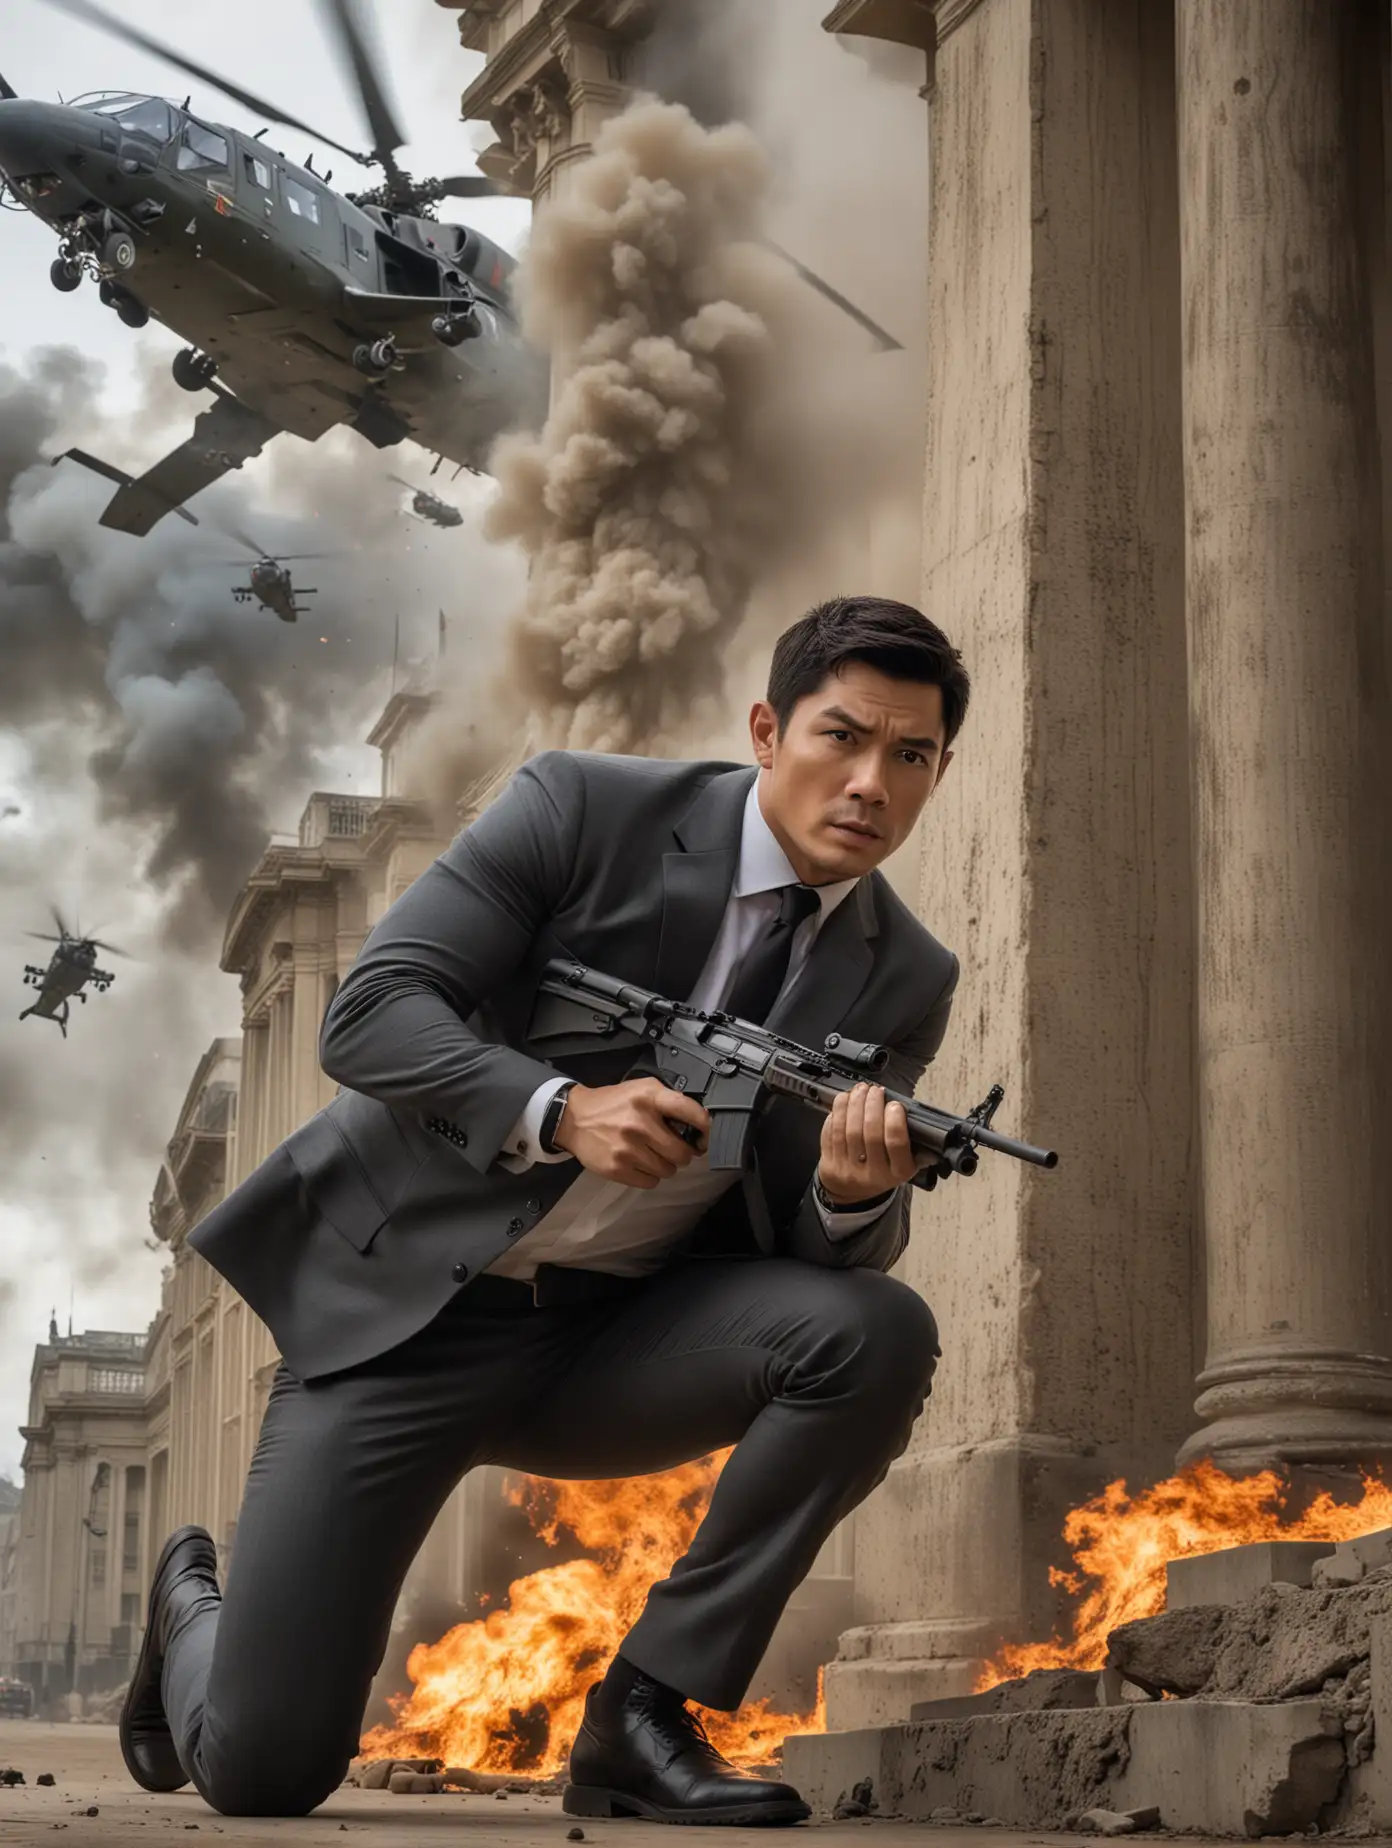 James Bond Actor Henry Golding Defending with Pistol Amid Helicopter Assault